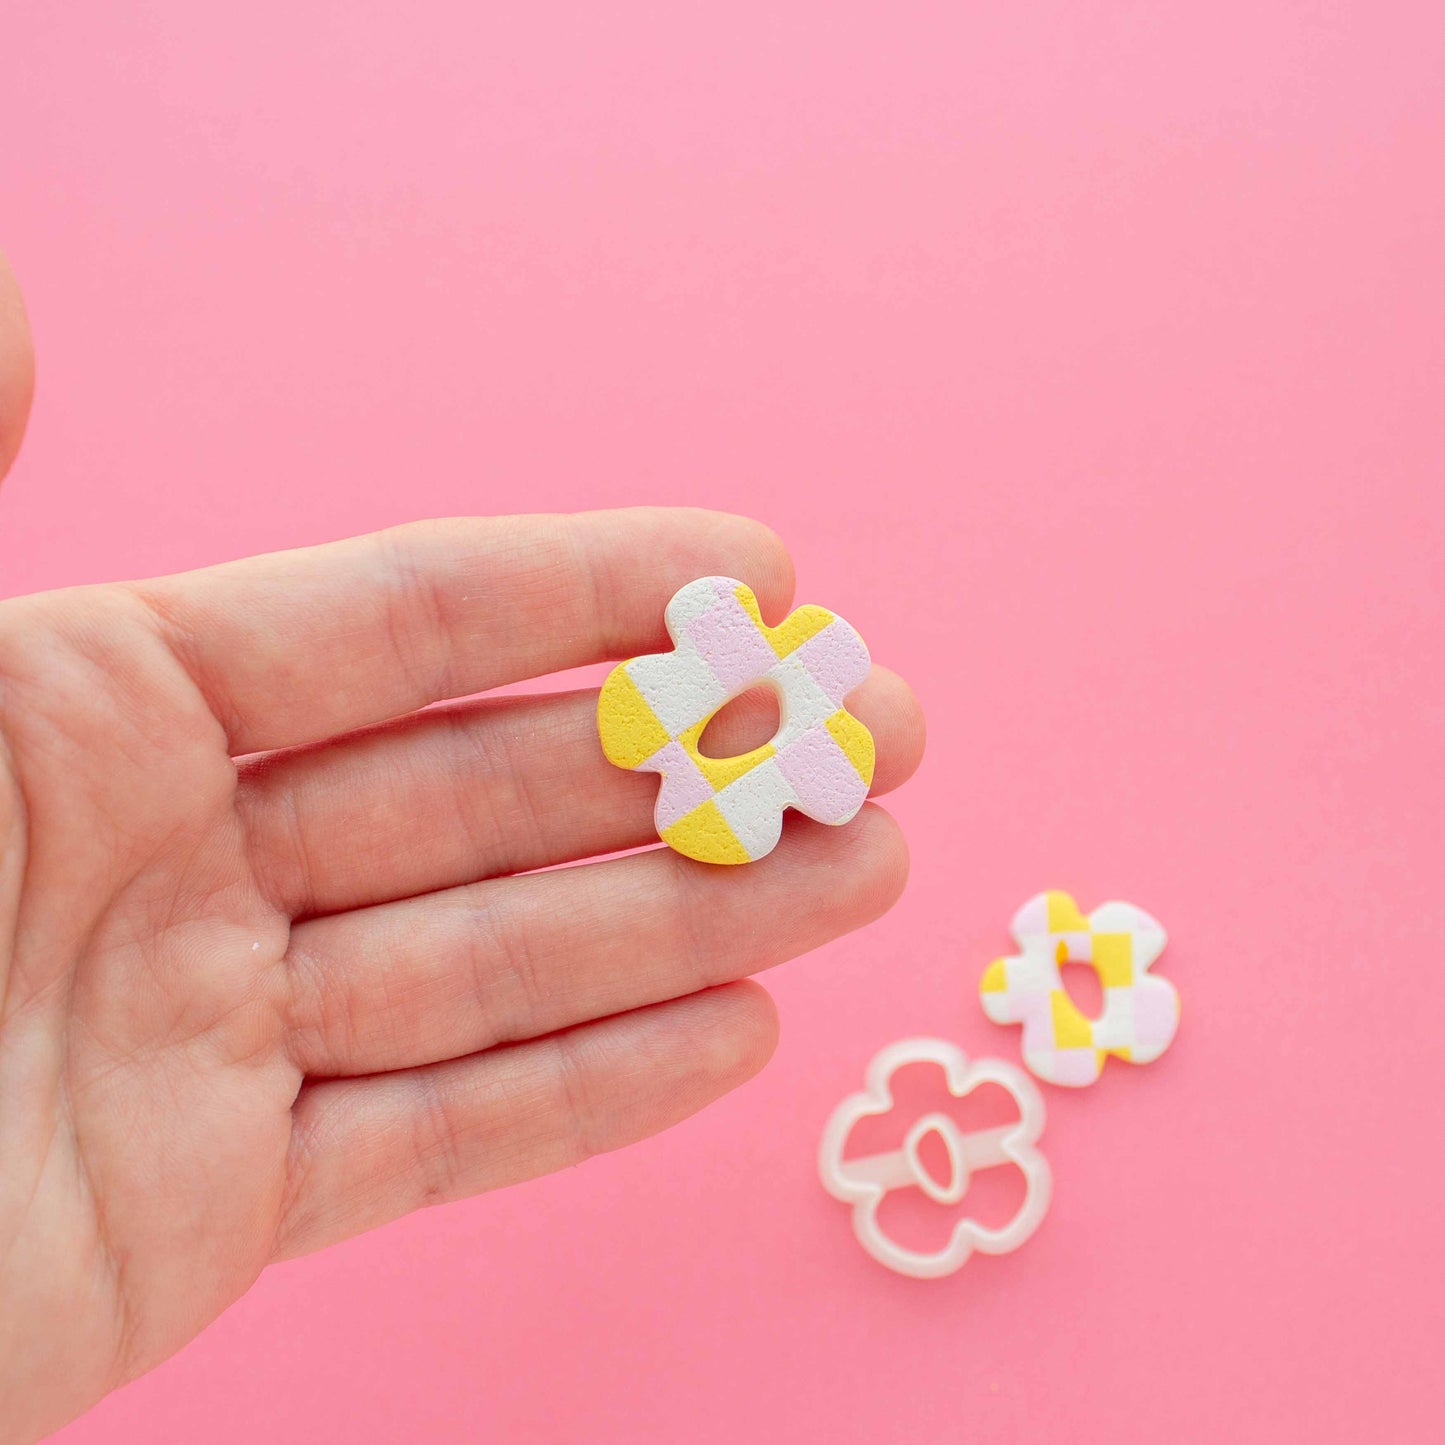 Small polymer clay flower earring in a hand and a cutter in a oink background